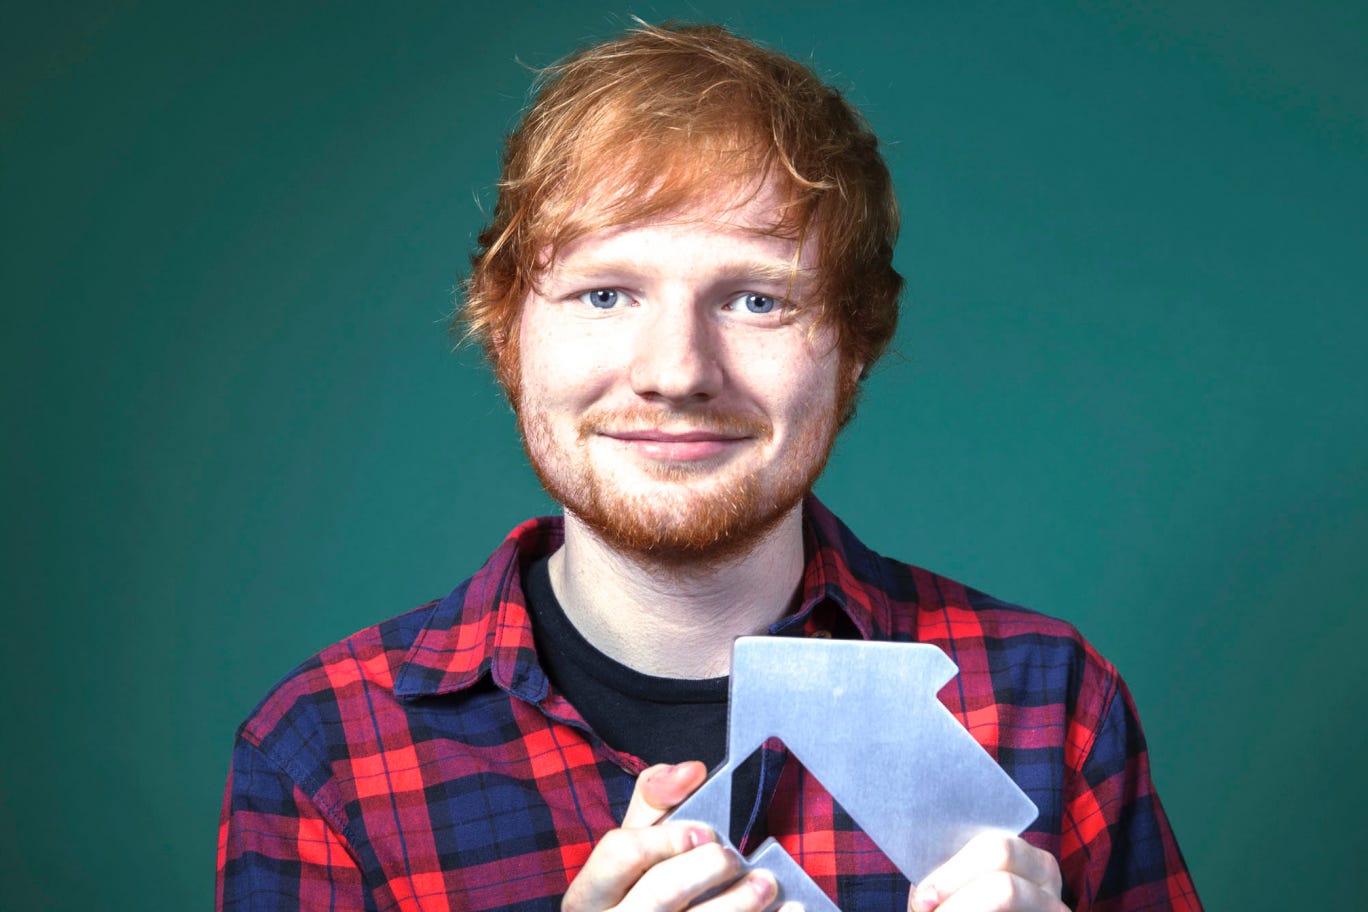 Ed Sheeran has not only scored the UK Number 1 single this week, but also set a brand new chart record. - Ed-sheeran-No1-ChartComp